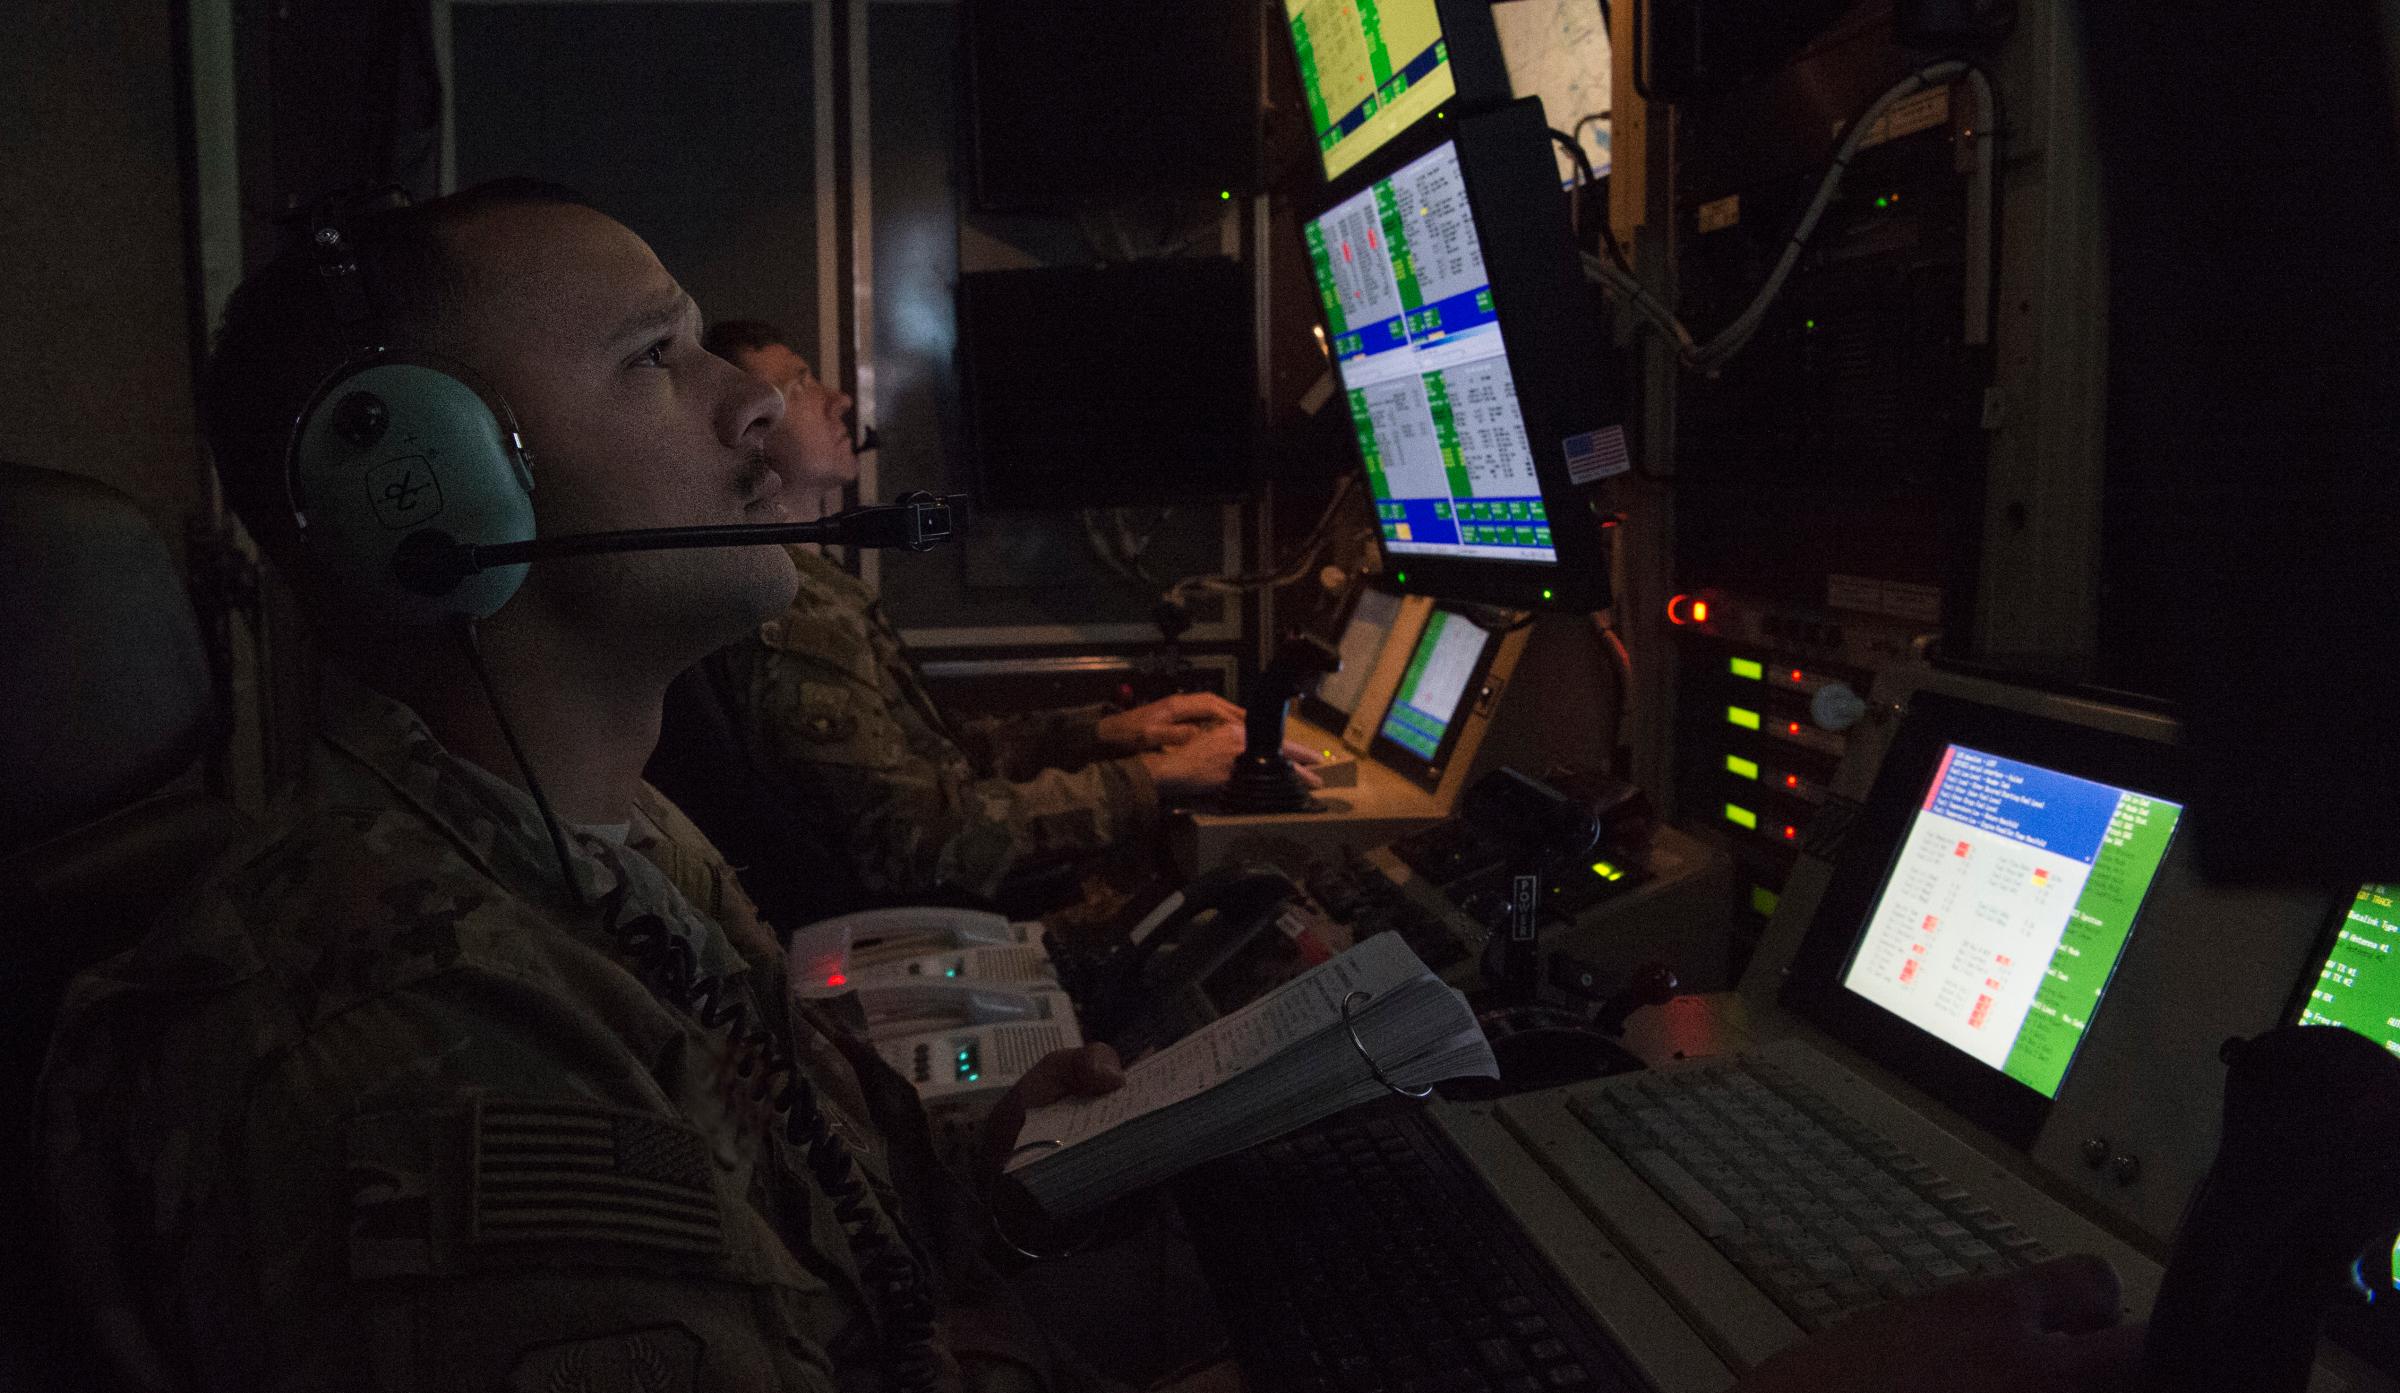 Capt. Derrick, 46th Expeditionary Attack Squadron pilot, and Staff Sgt. Marcus, 46th EATKS MQ-9 sensor operator, check aircraft system operations during preflight of an MQ-9 Reaper at an undisclosed location in Southwest Asia